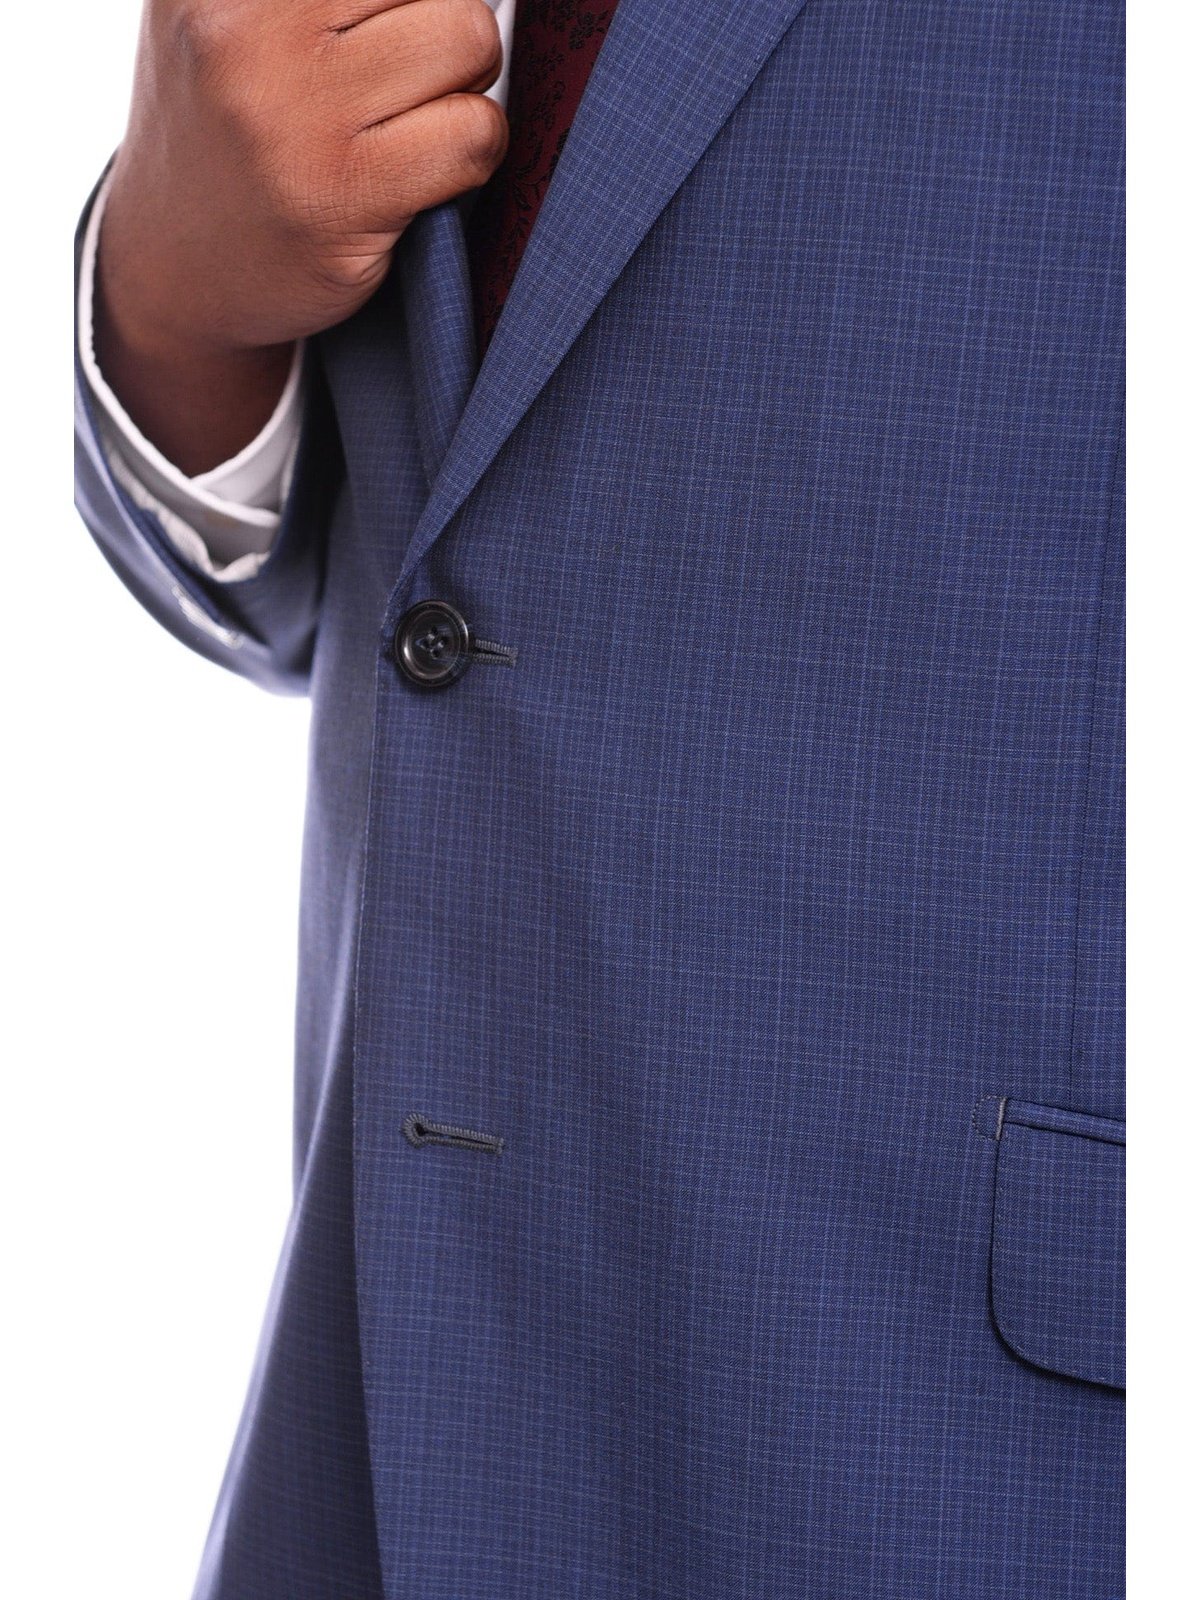 Napoli TWO PIECE SUITS Napoli Slim Fit Blue Mini Check Two Button Half Canvassed Wool Suit